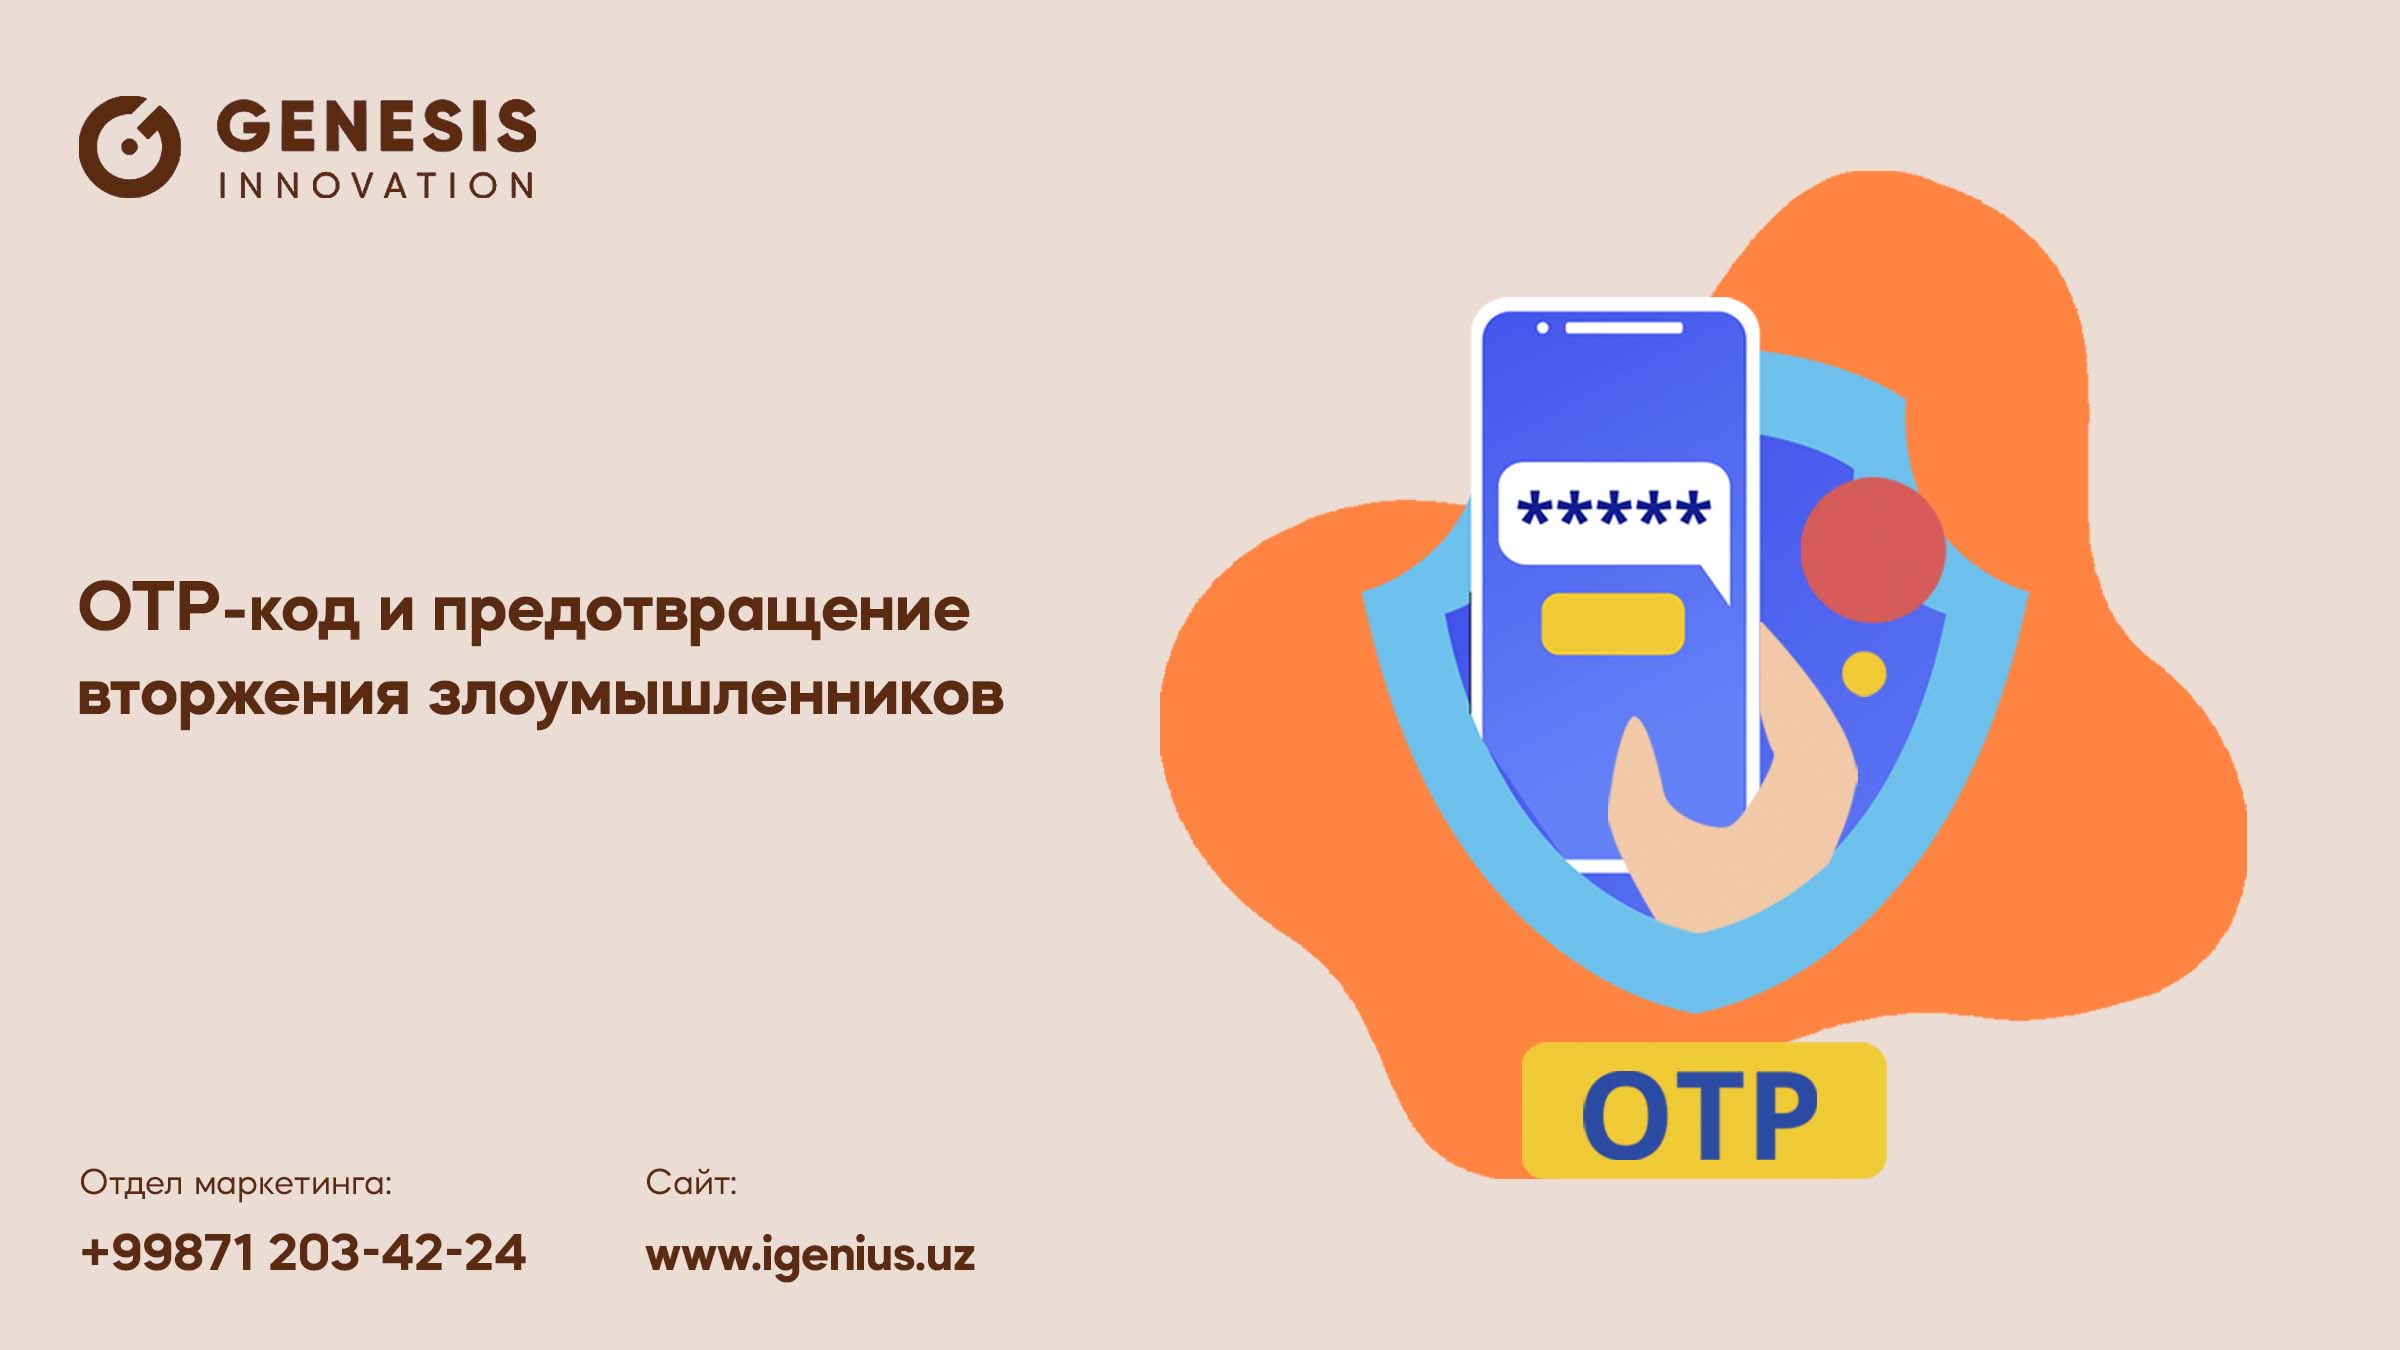 How to get OTP and prevent intruders?!